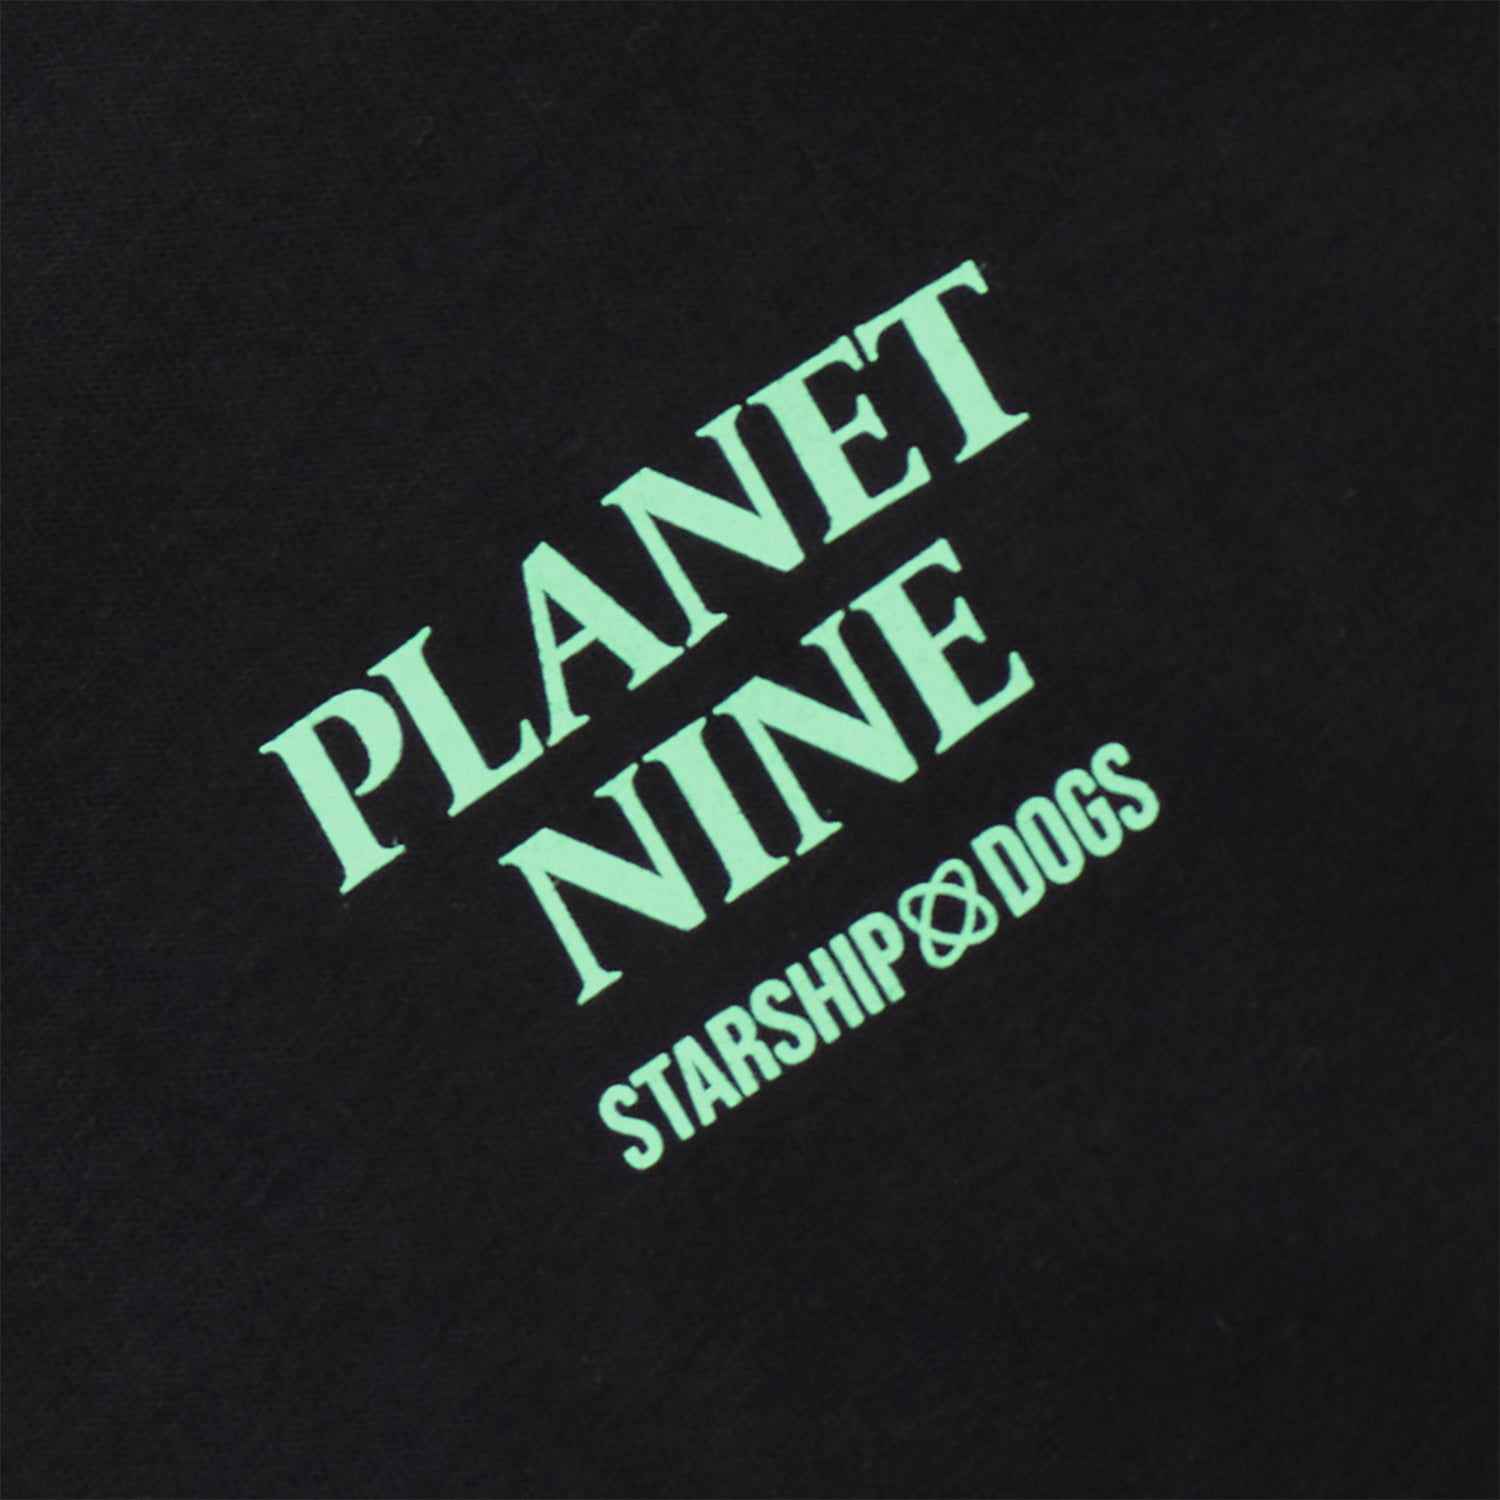 Zoomed-In Photo of the Left Chest Print 'PLANET NINE STARSHIP DOGS'. Body color black. Print color light green.